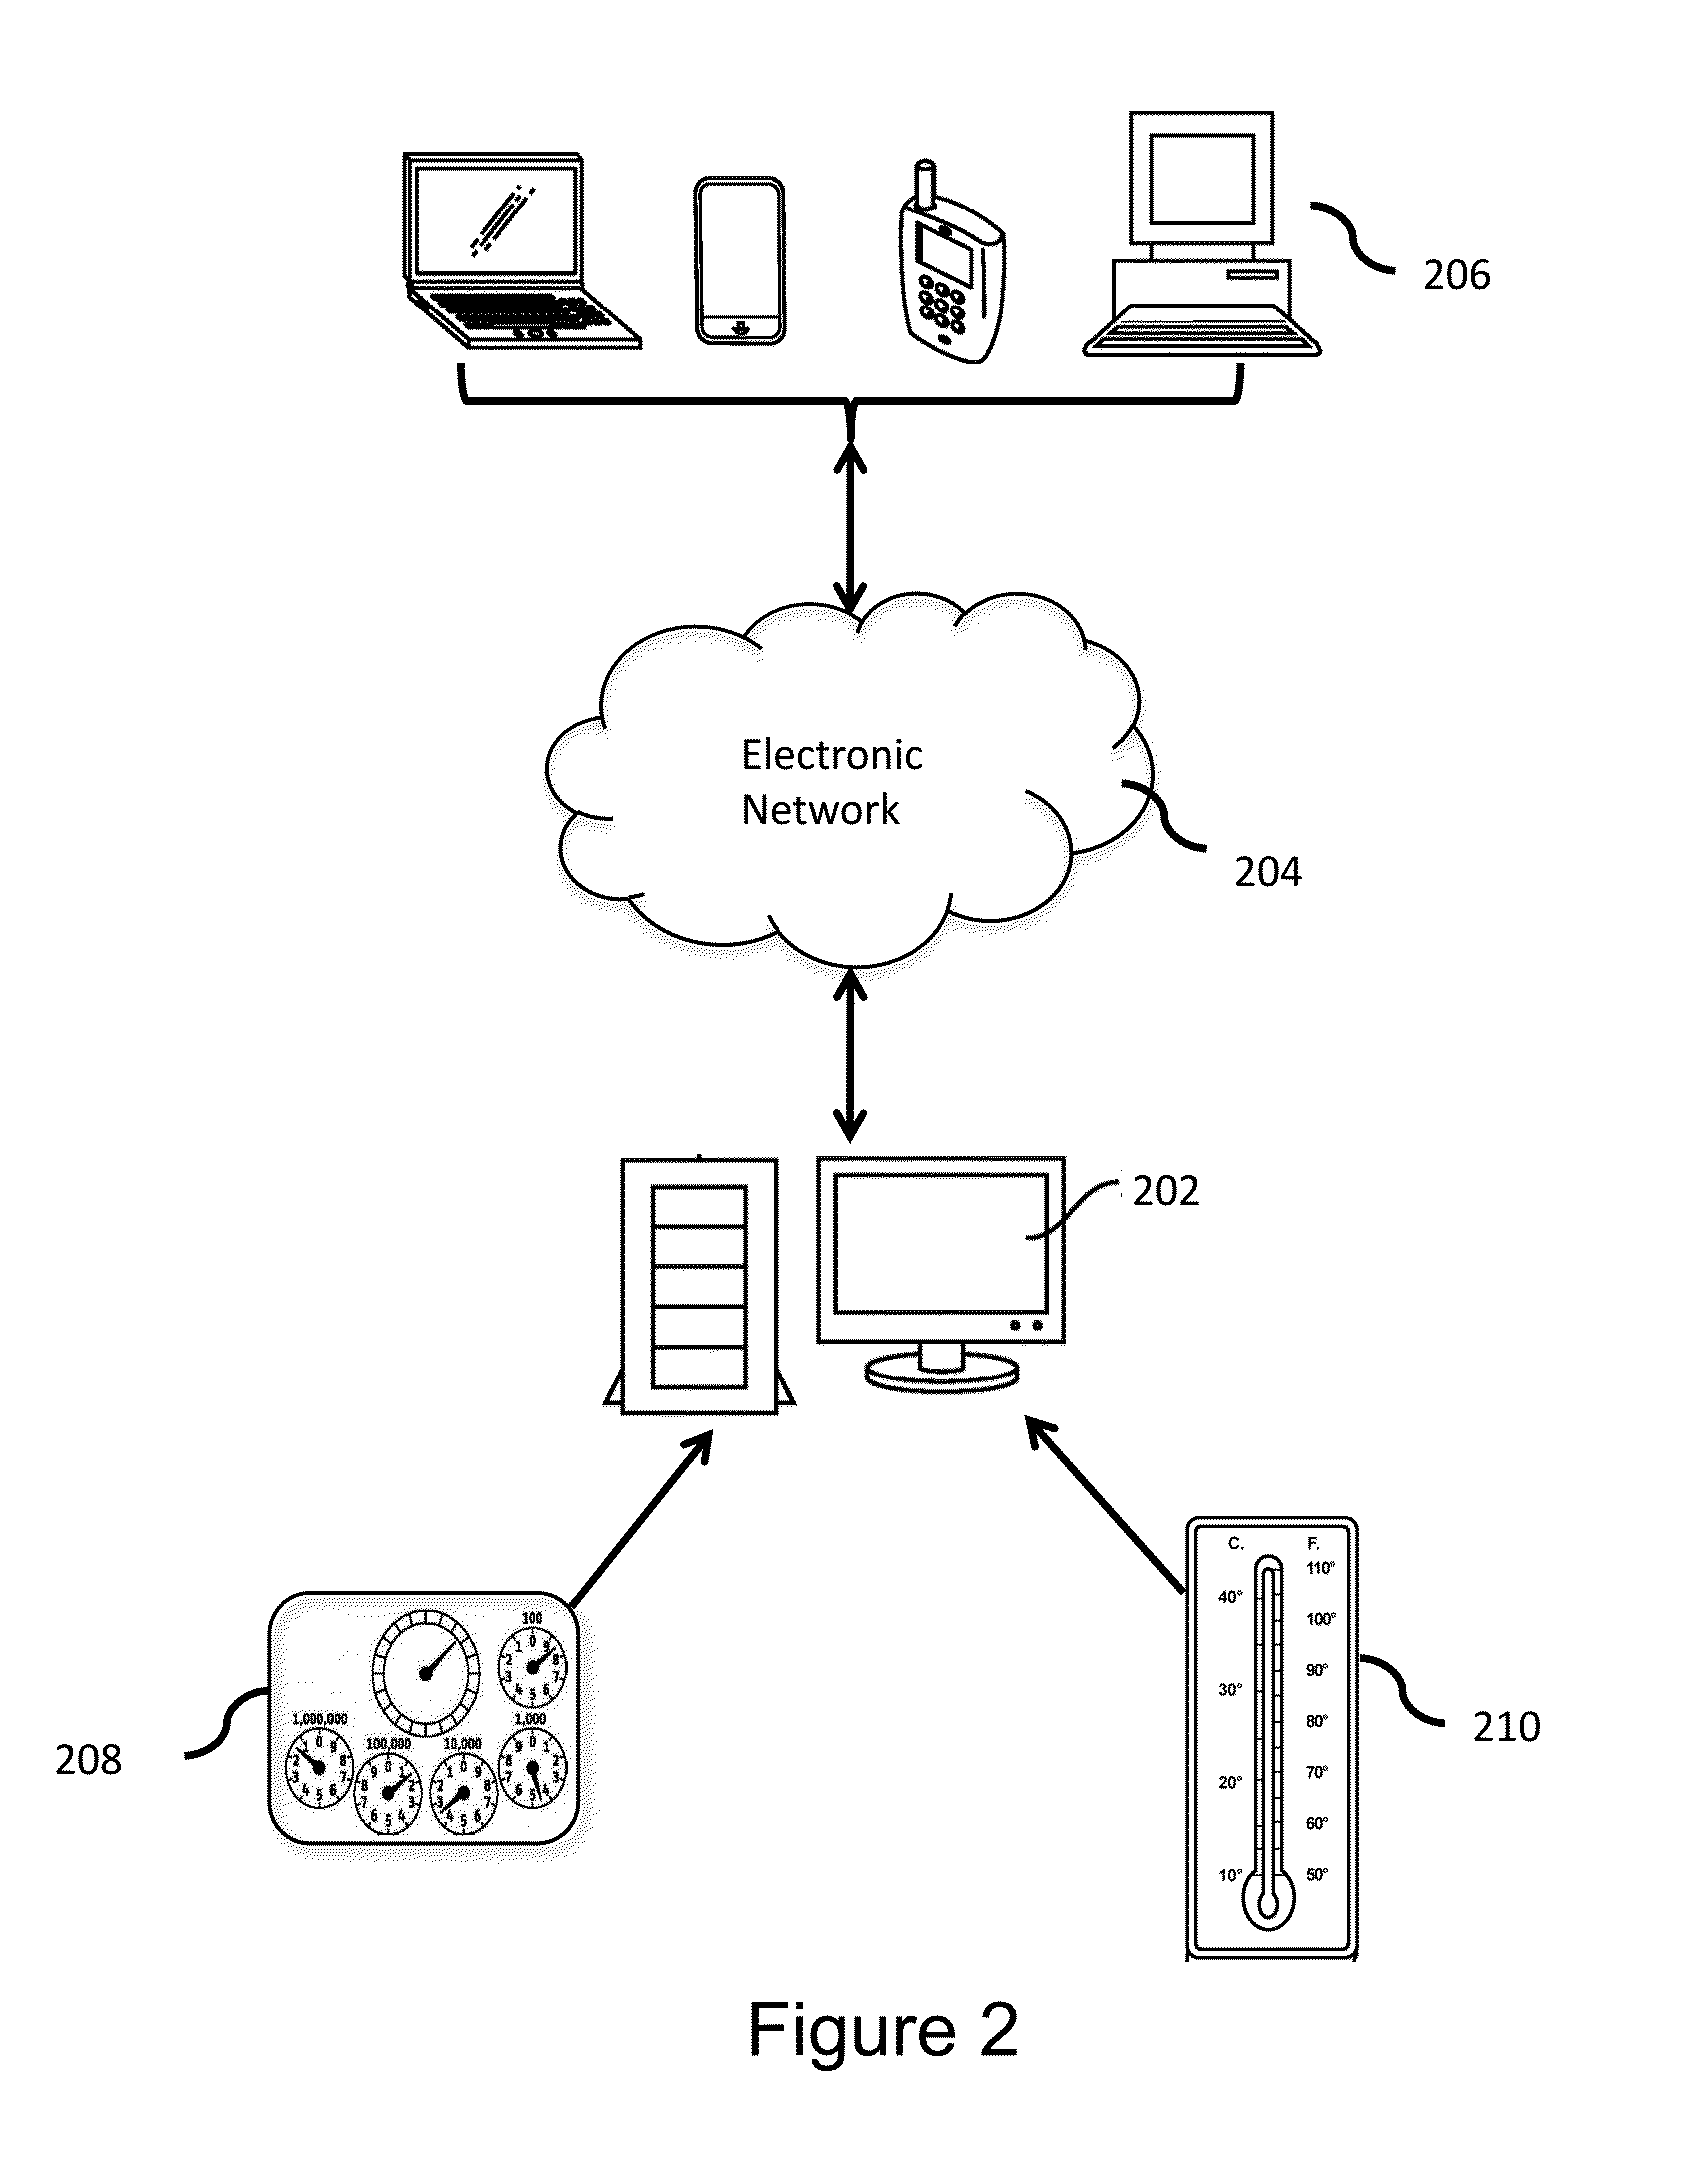 System and method for residential utility monitoring and improvement of energy efficiency